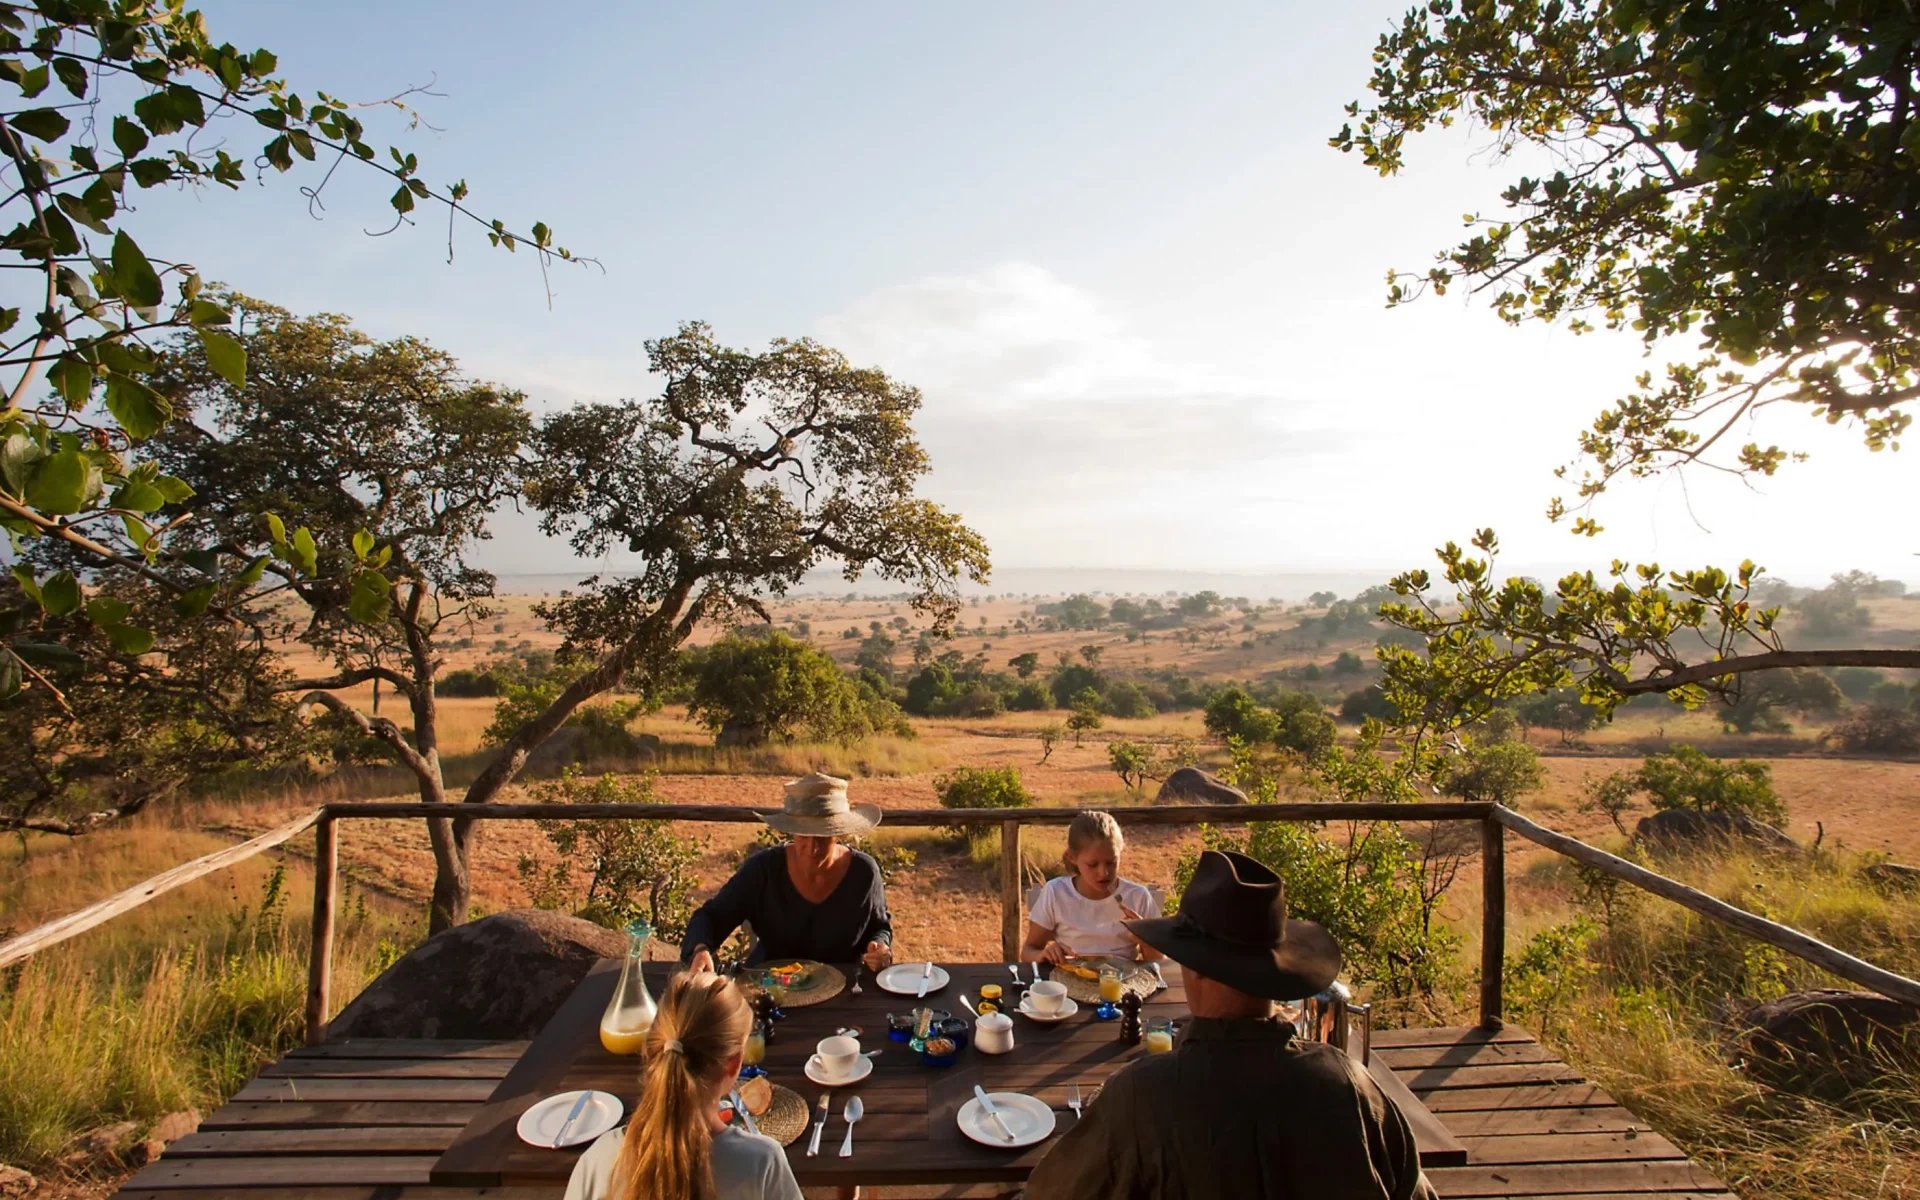 A family enjoy a delicious breakfast on the sun deck at Lamai Serengeti, ahead of a vast scene of grasslands and hillsides.